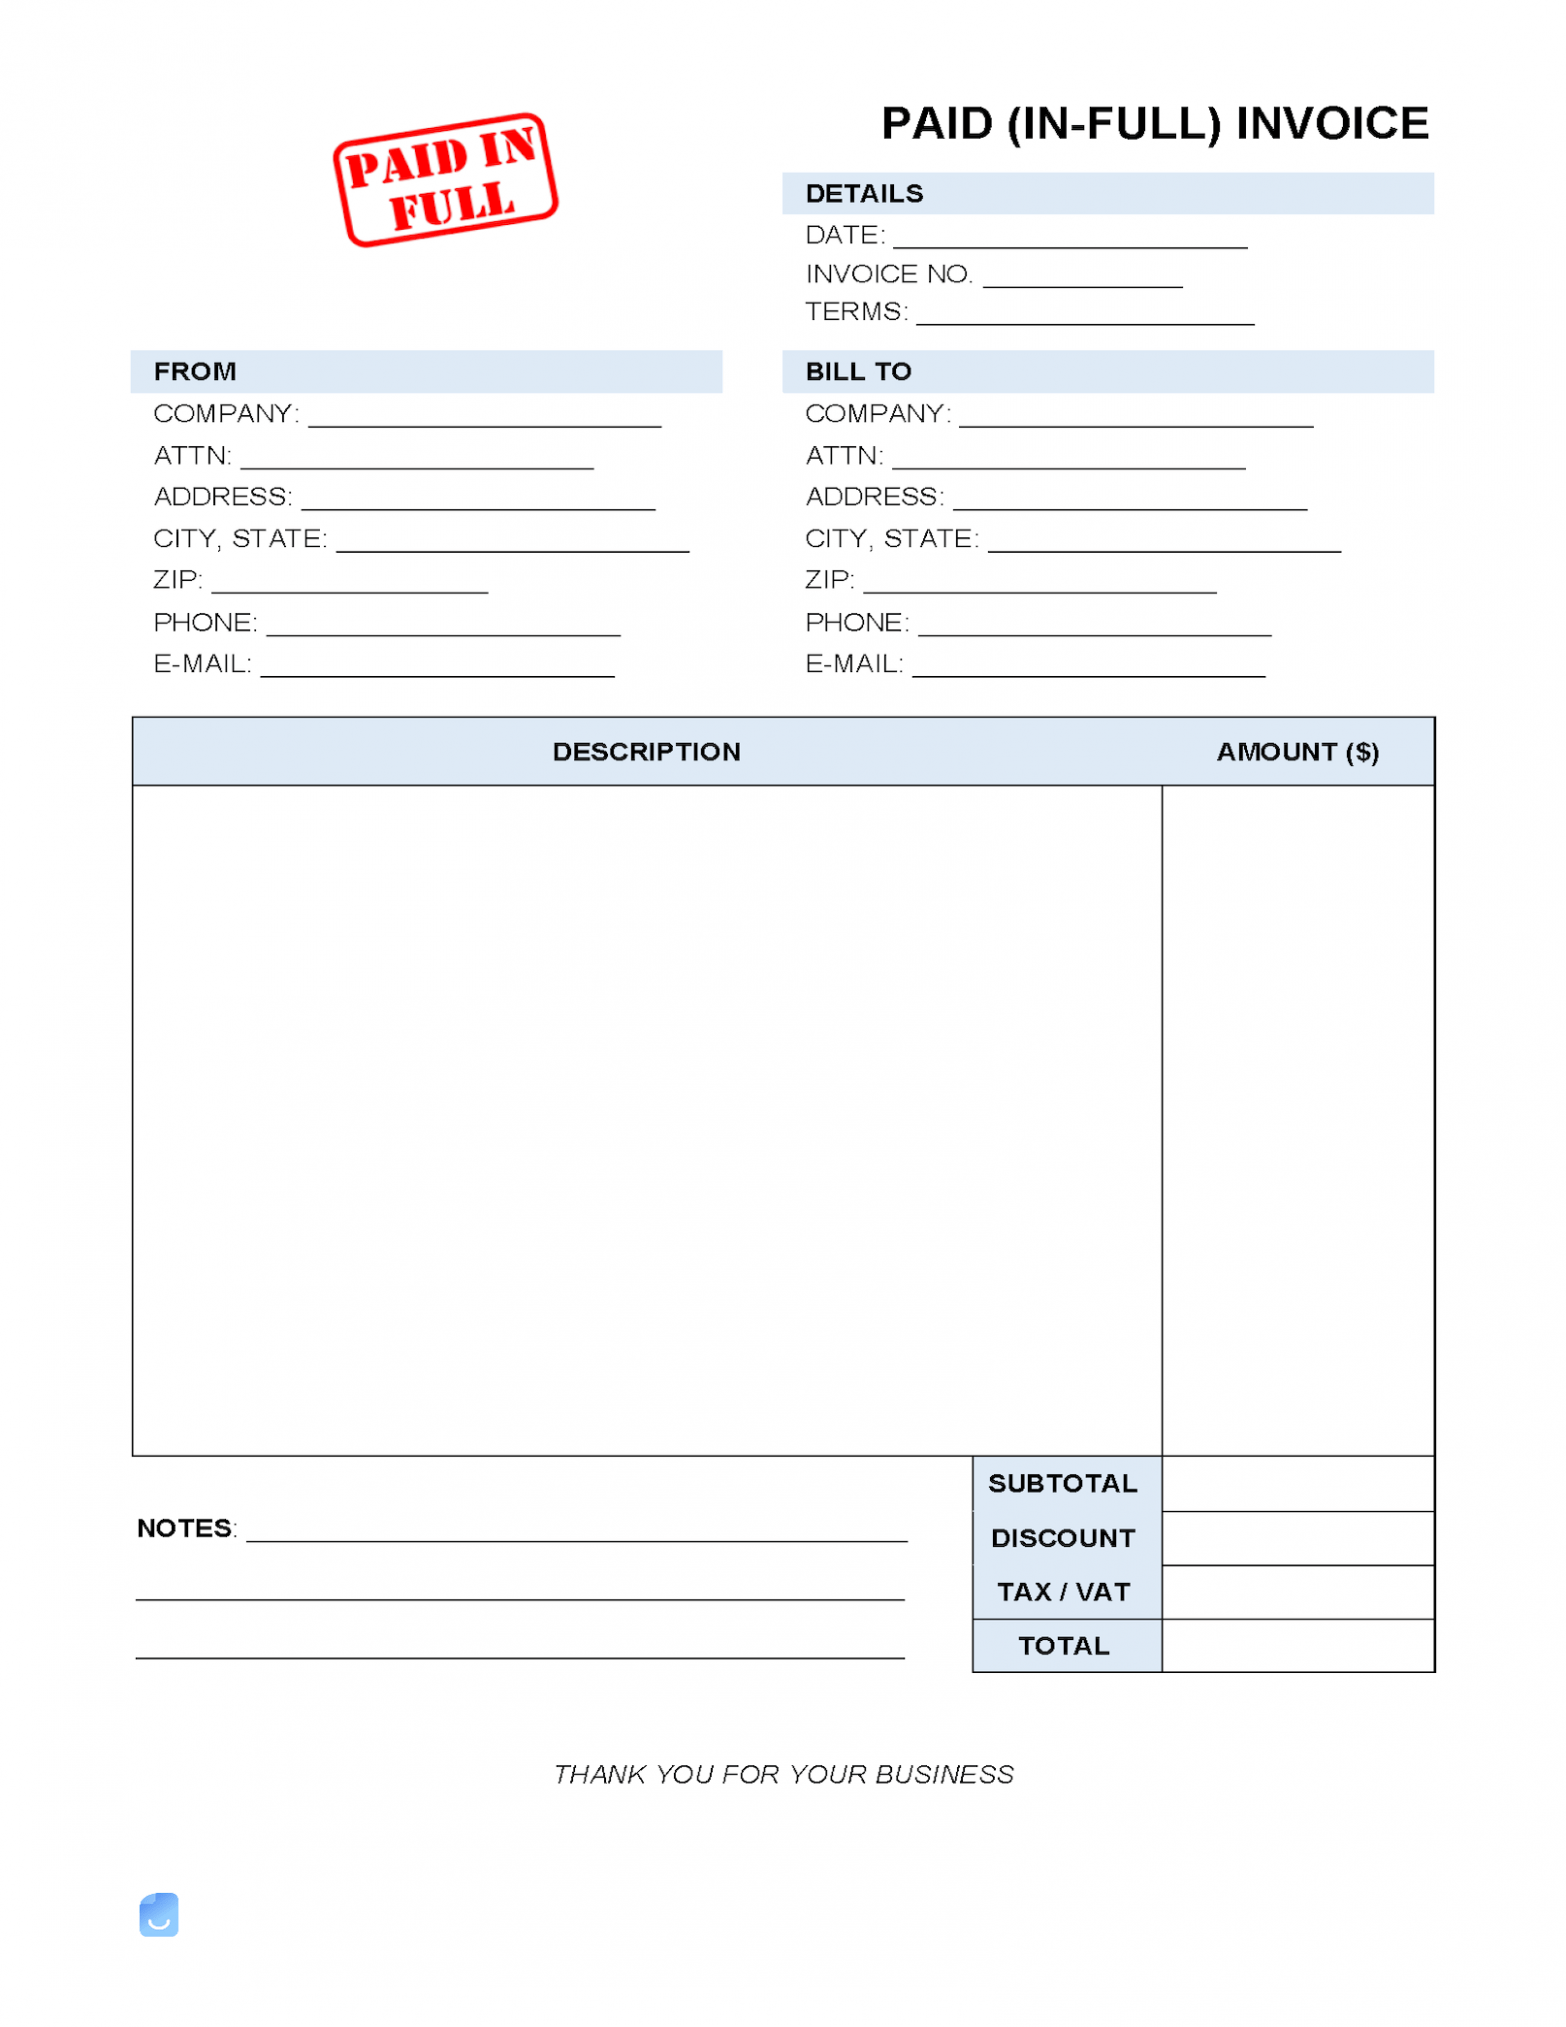 Printable Paid In Full Invoice Template Sample